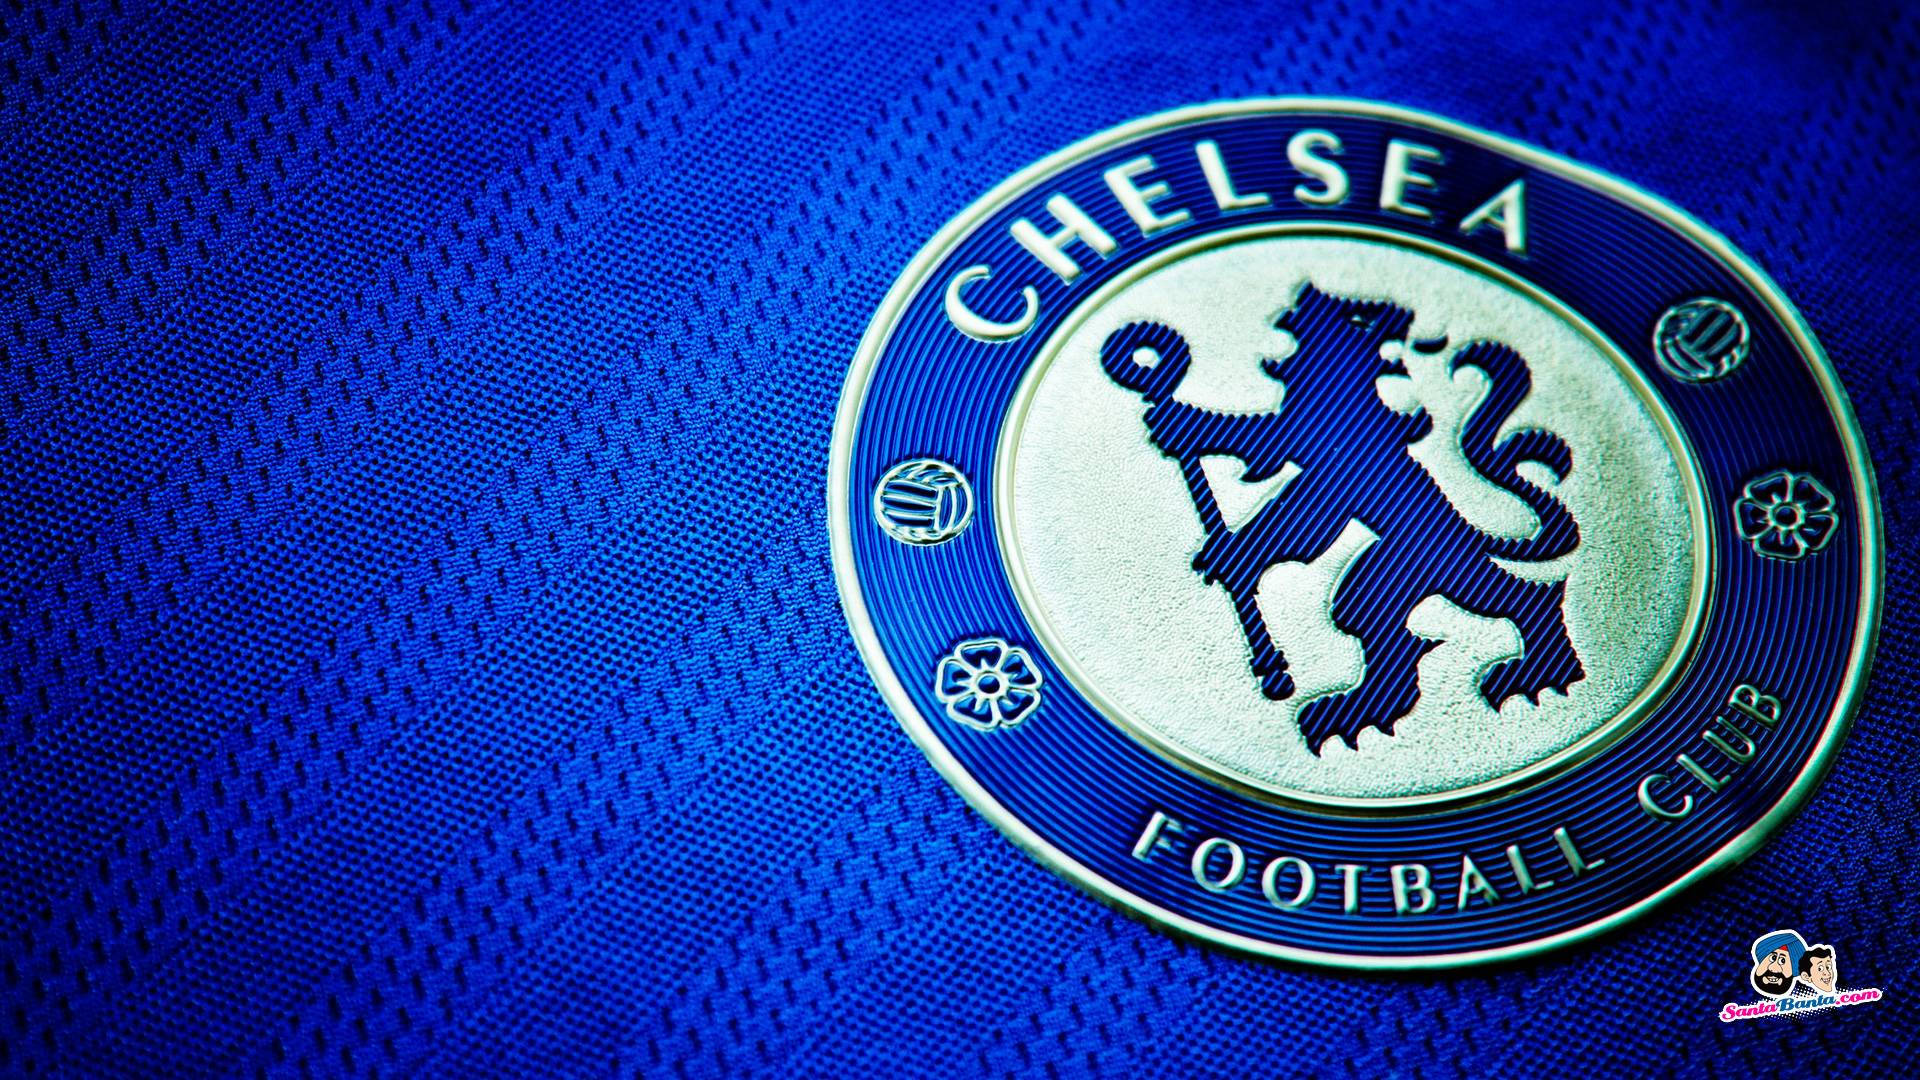 Chelsea Fc Jersey Close-up Wallpaper